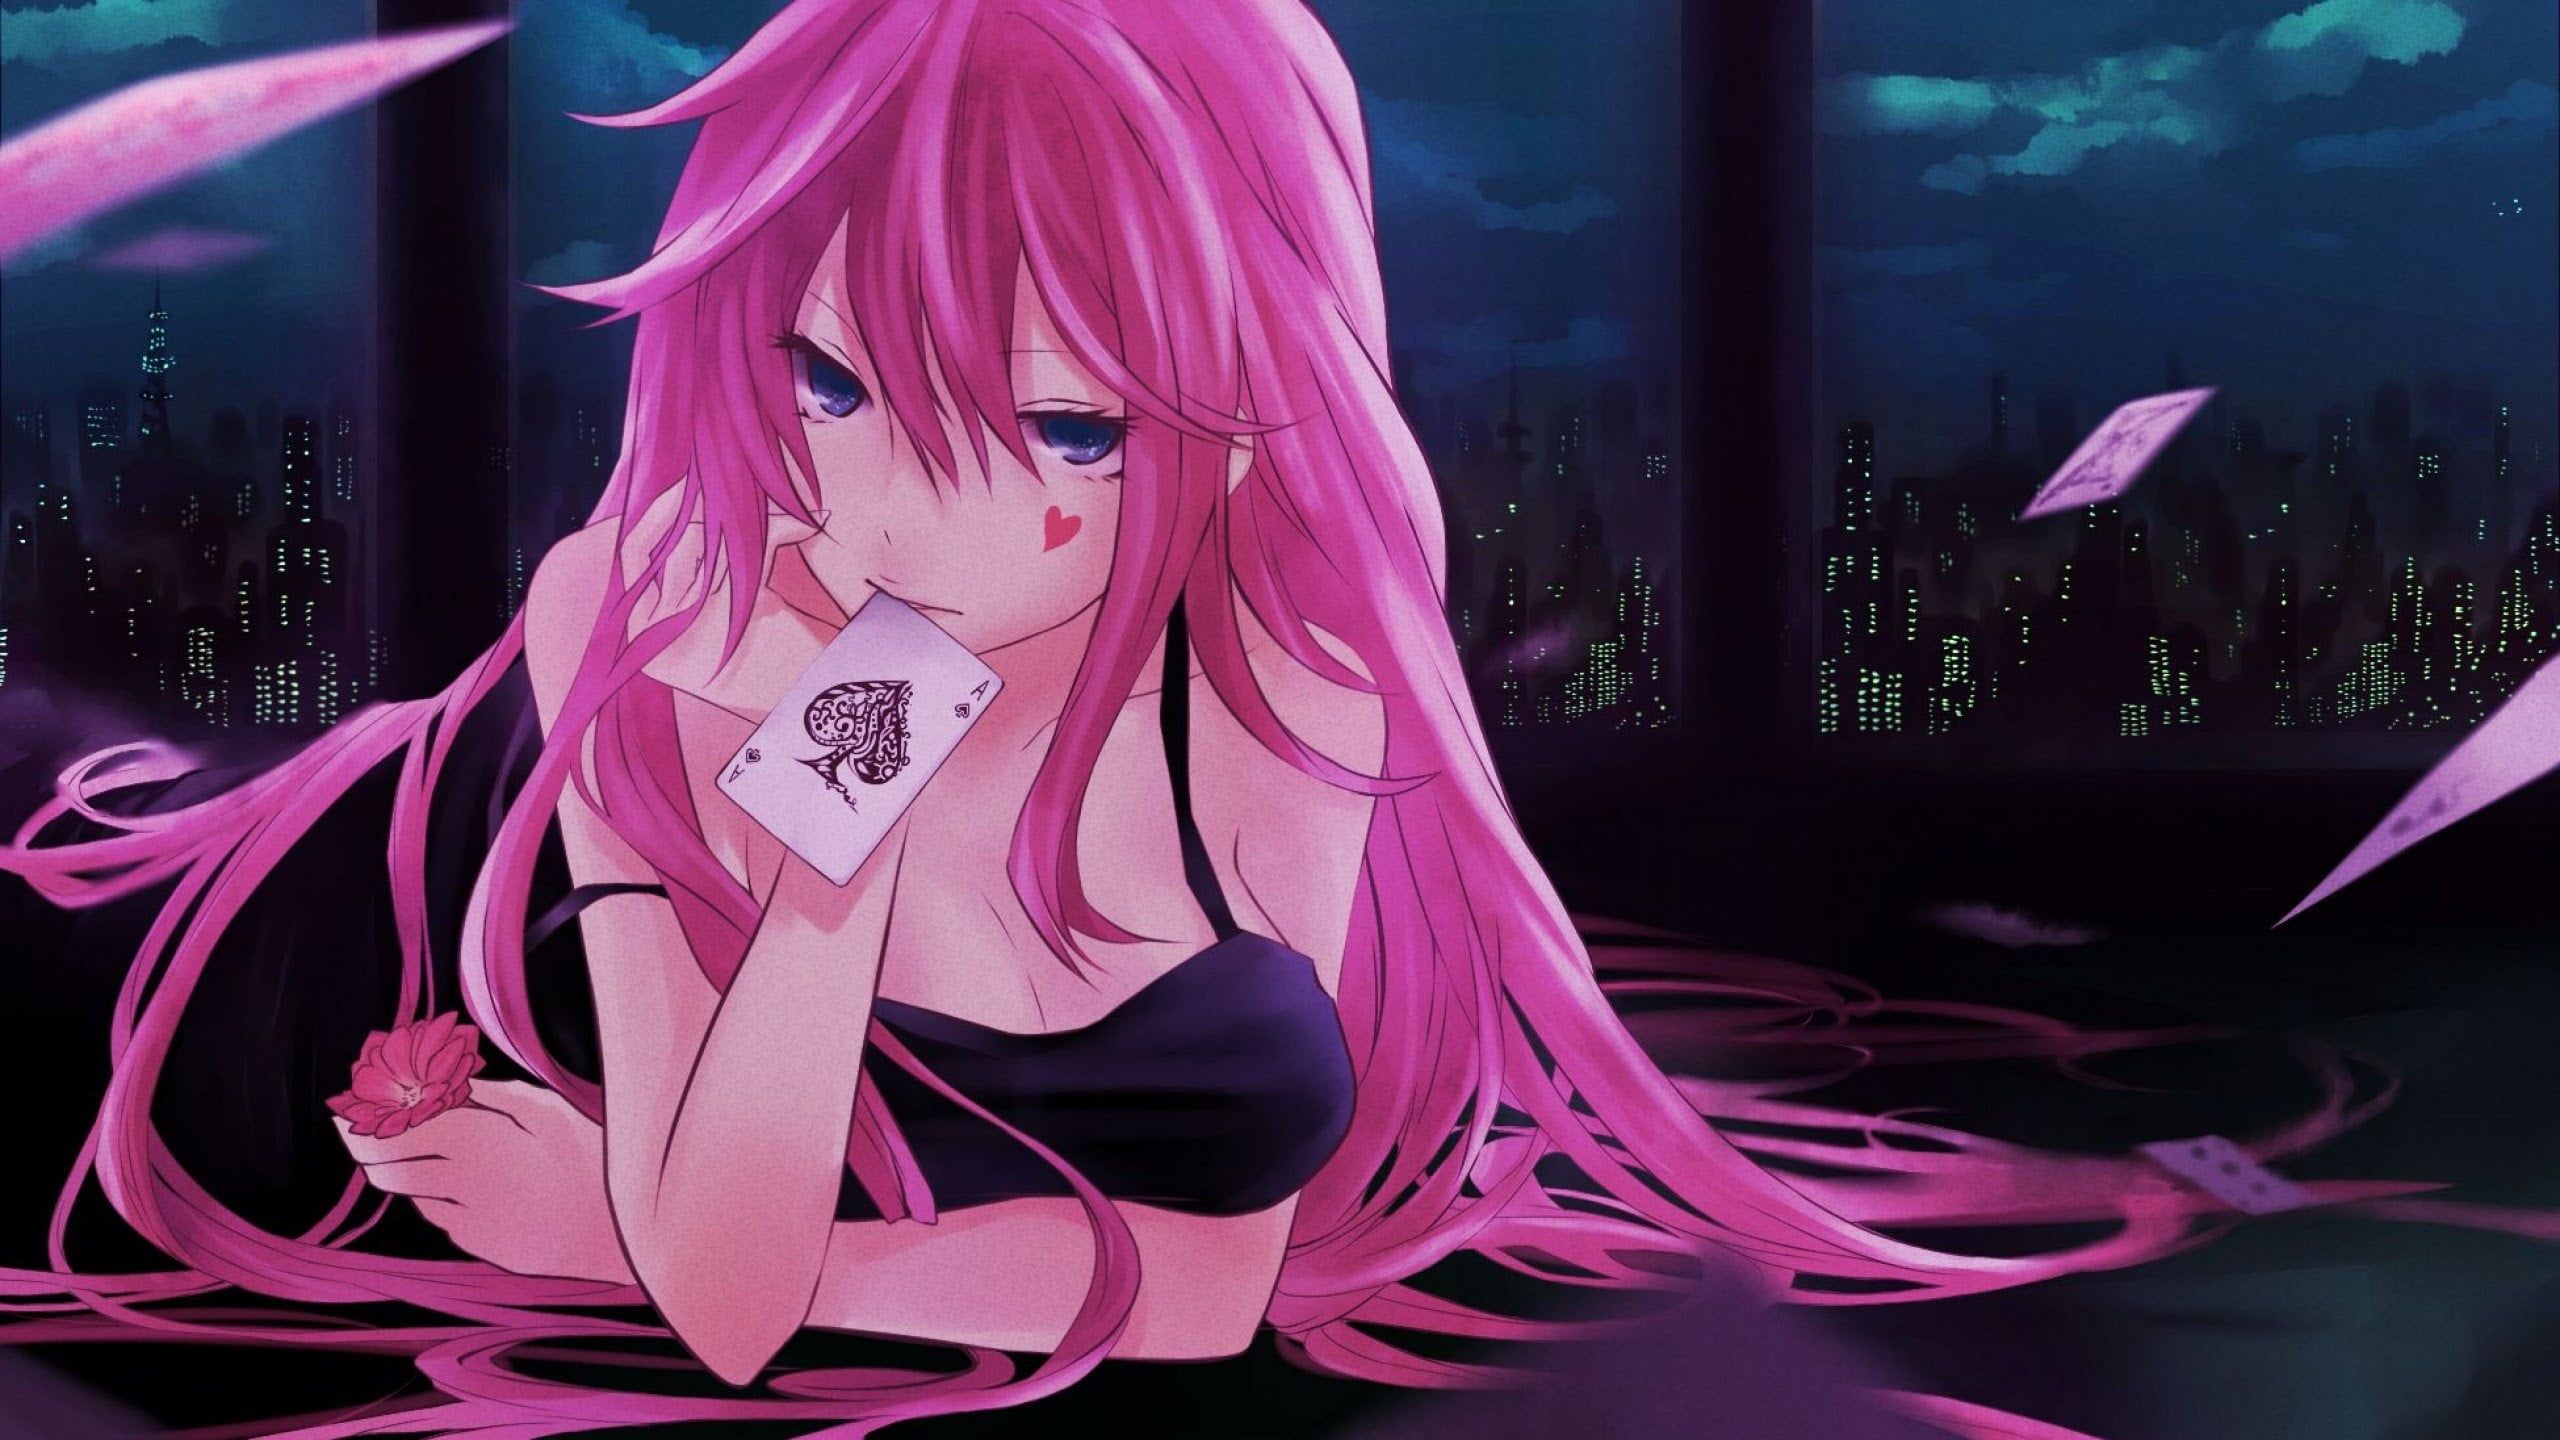 Female anime eating spade of card, anime, Vocaloid, pink hair